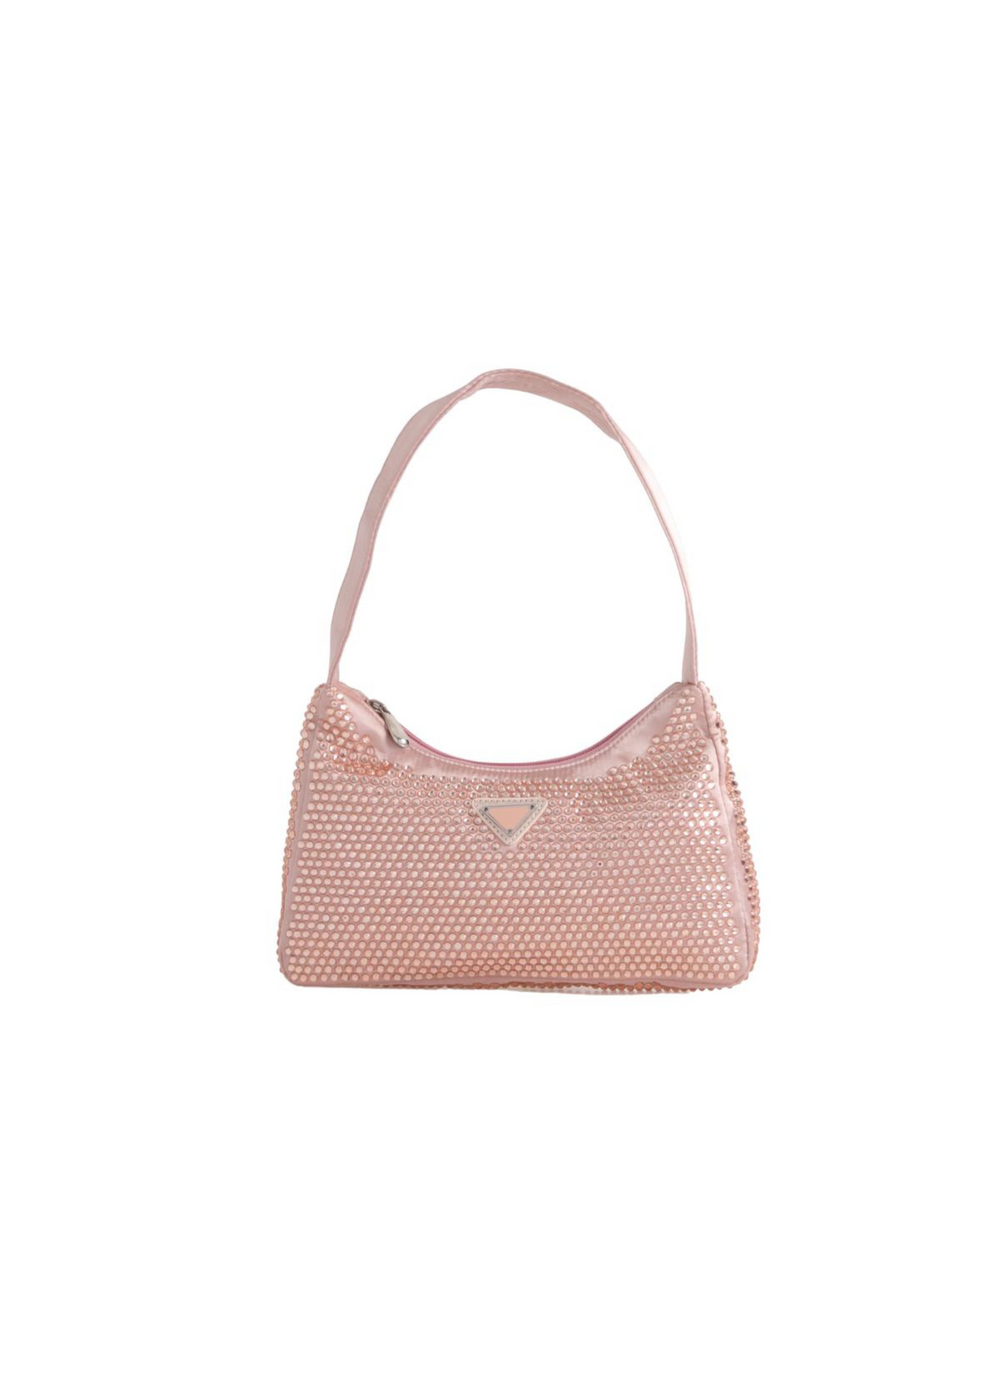 AVERY SPARKLY BAG WITH TOP HANDLE IN NUDE